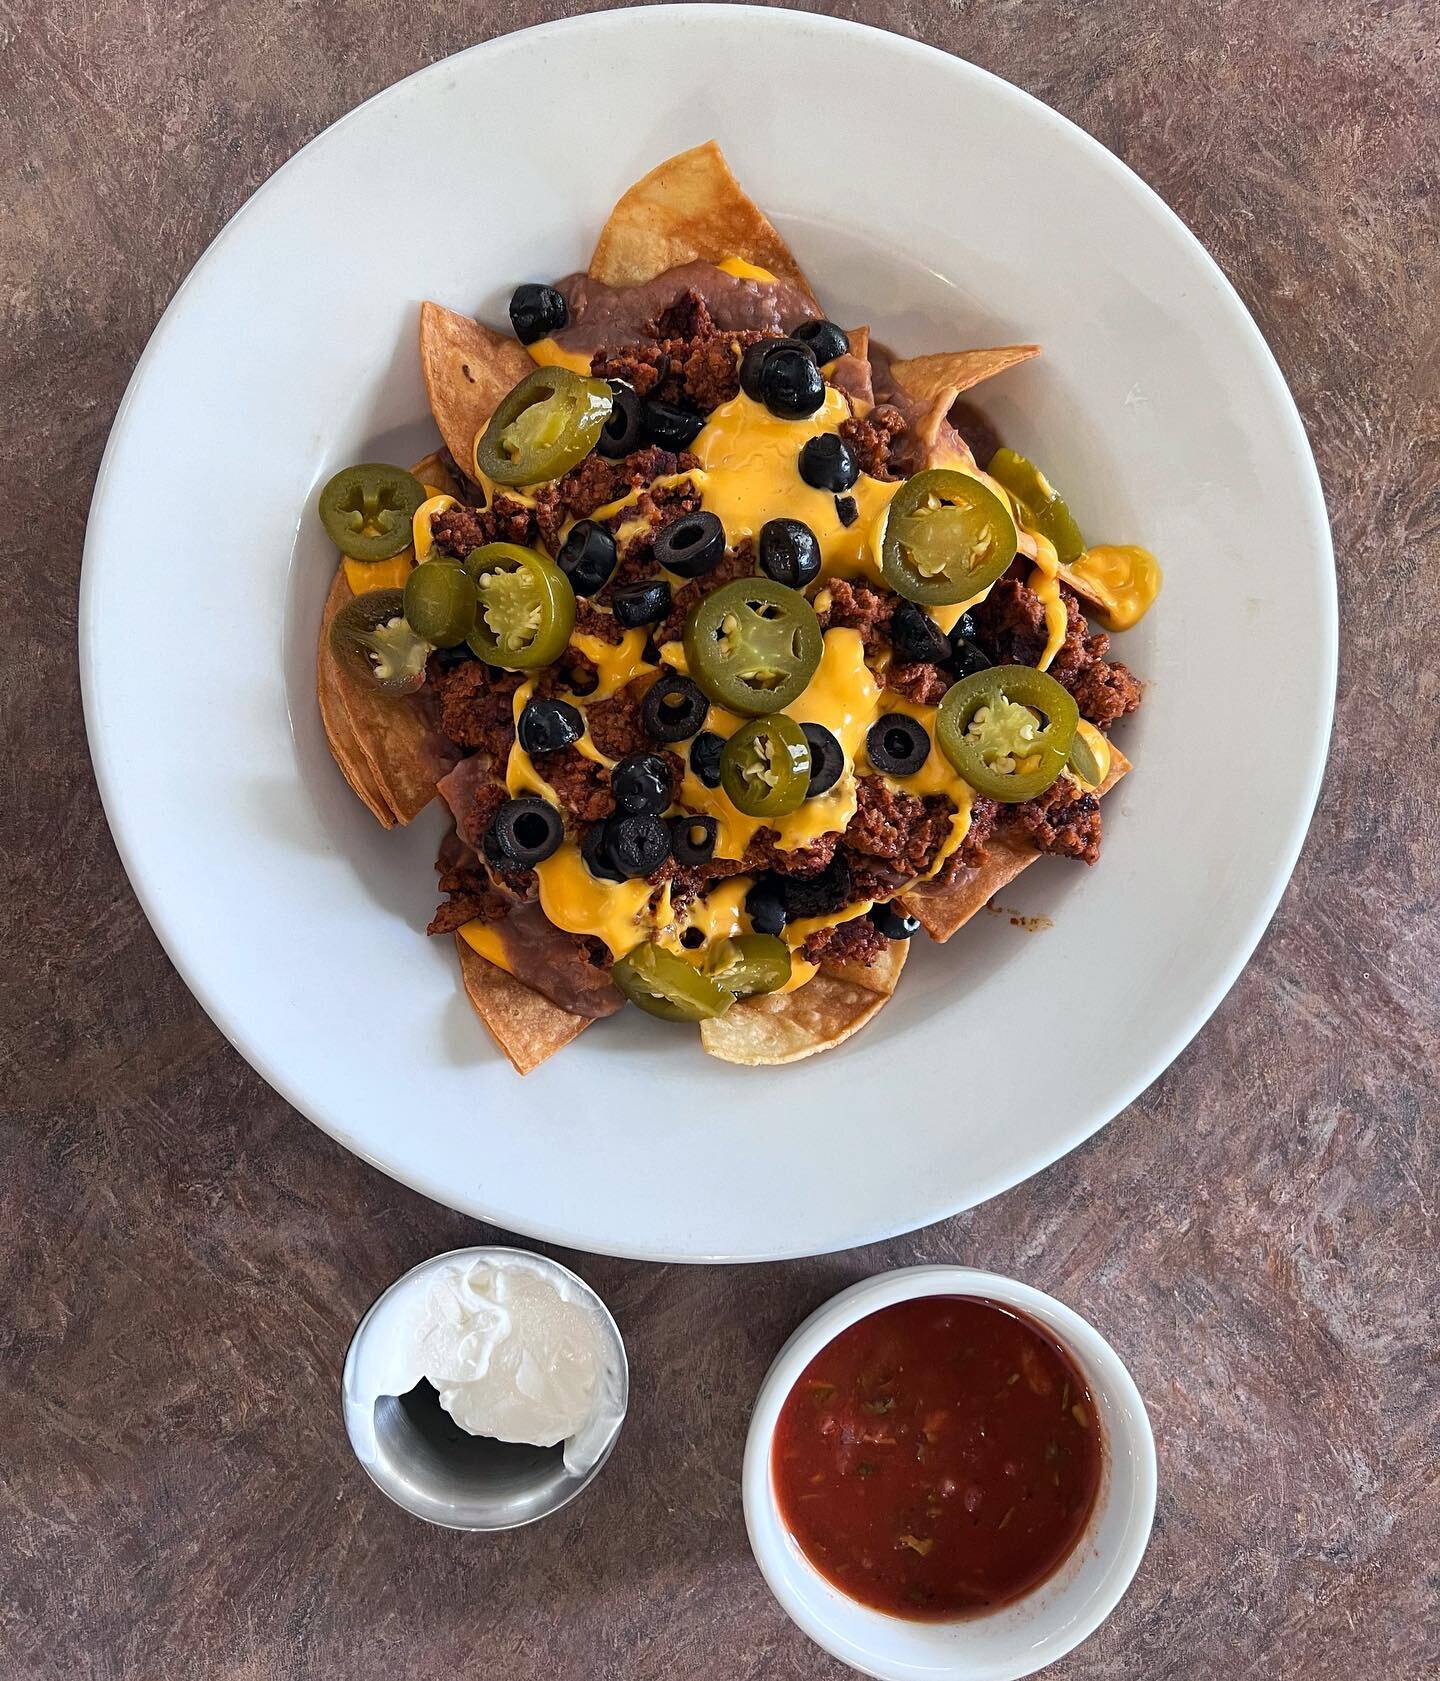 🚨SPECIAL ALERT🚨

Stopping by to watch the game? Make sure you grab an order of nachos while you can! 🍽

Every Saturday and Sunday during football season 🏈🏟🎉